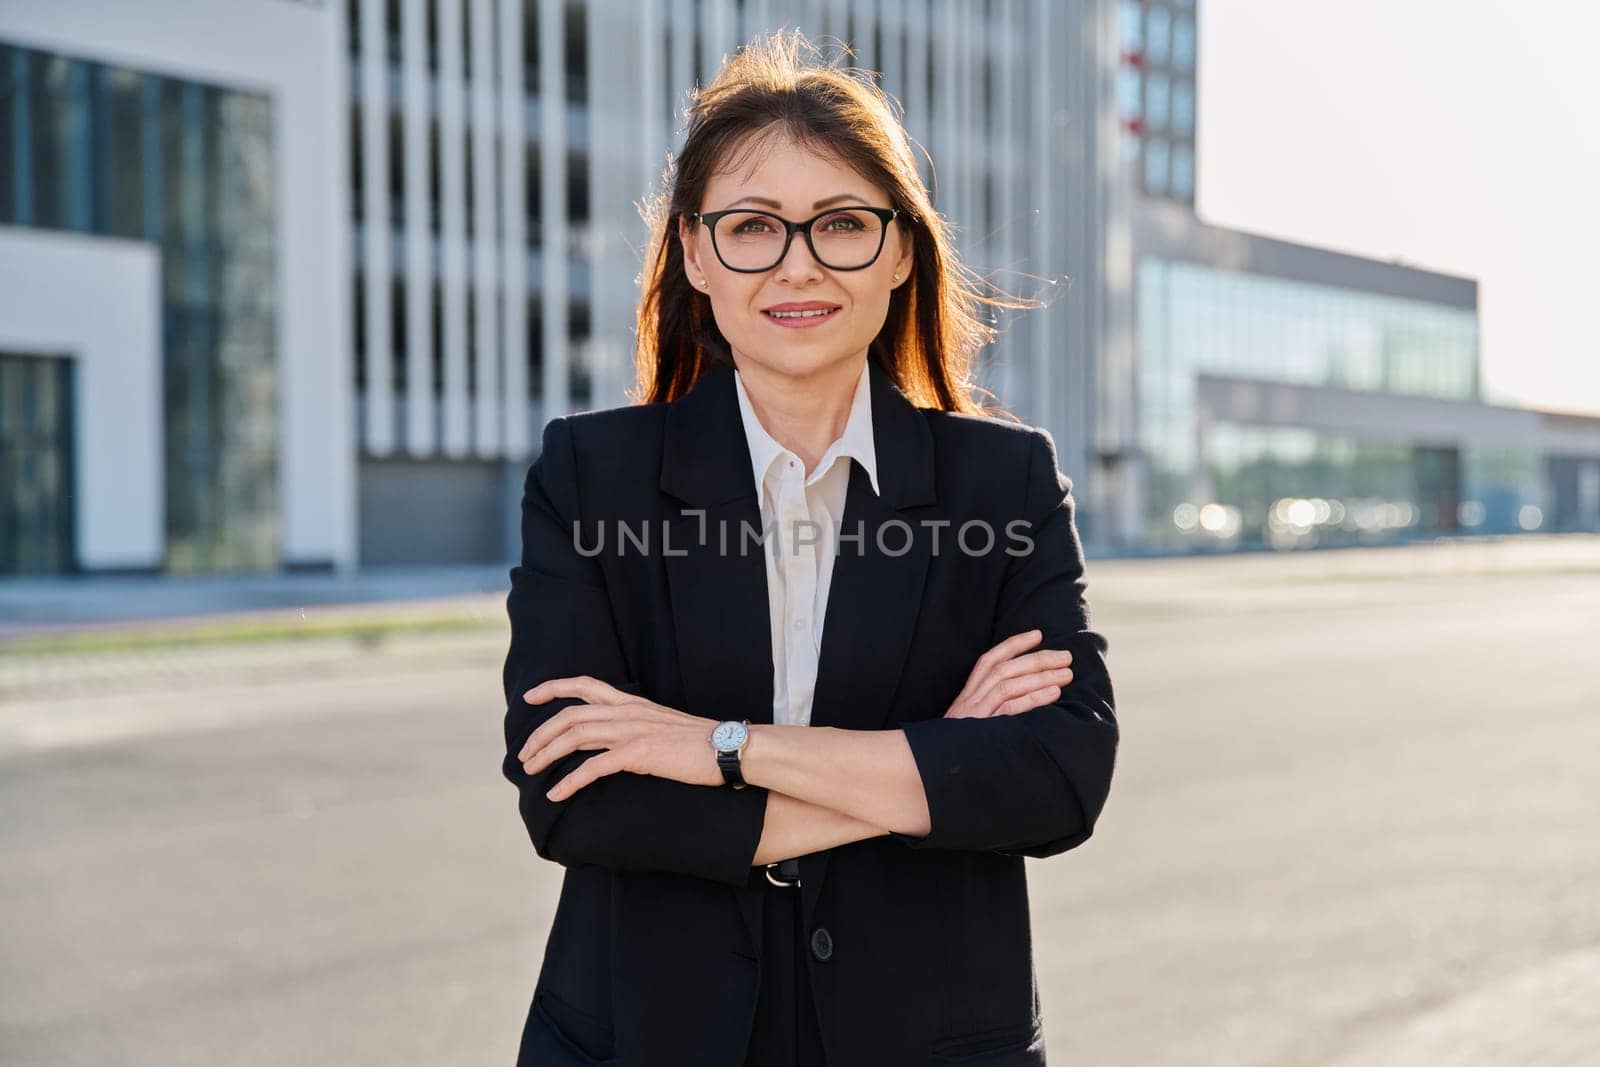 Portrait of middle-aged business confident woman in suit, with crossed arms, posing outdoors in urban style. Office employee worker businesswoman teacher entrepreneur economist banker financier lawyer